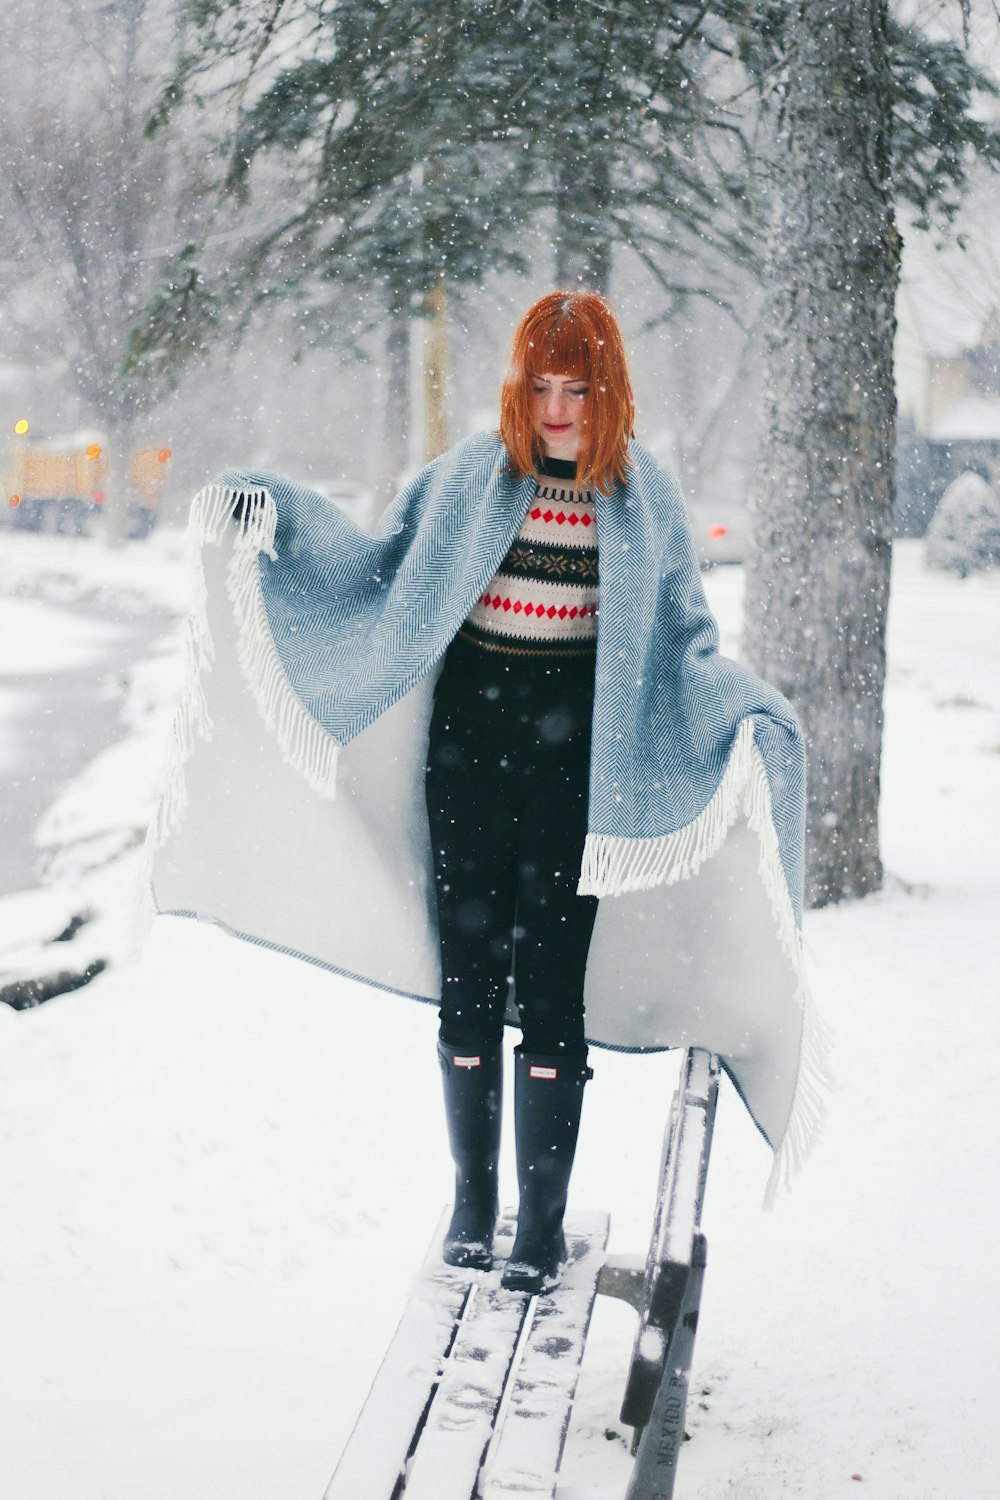 woman standing on snow covered bench while snowing during daytime